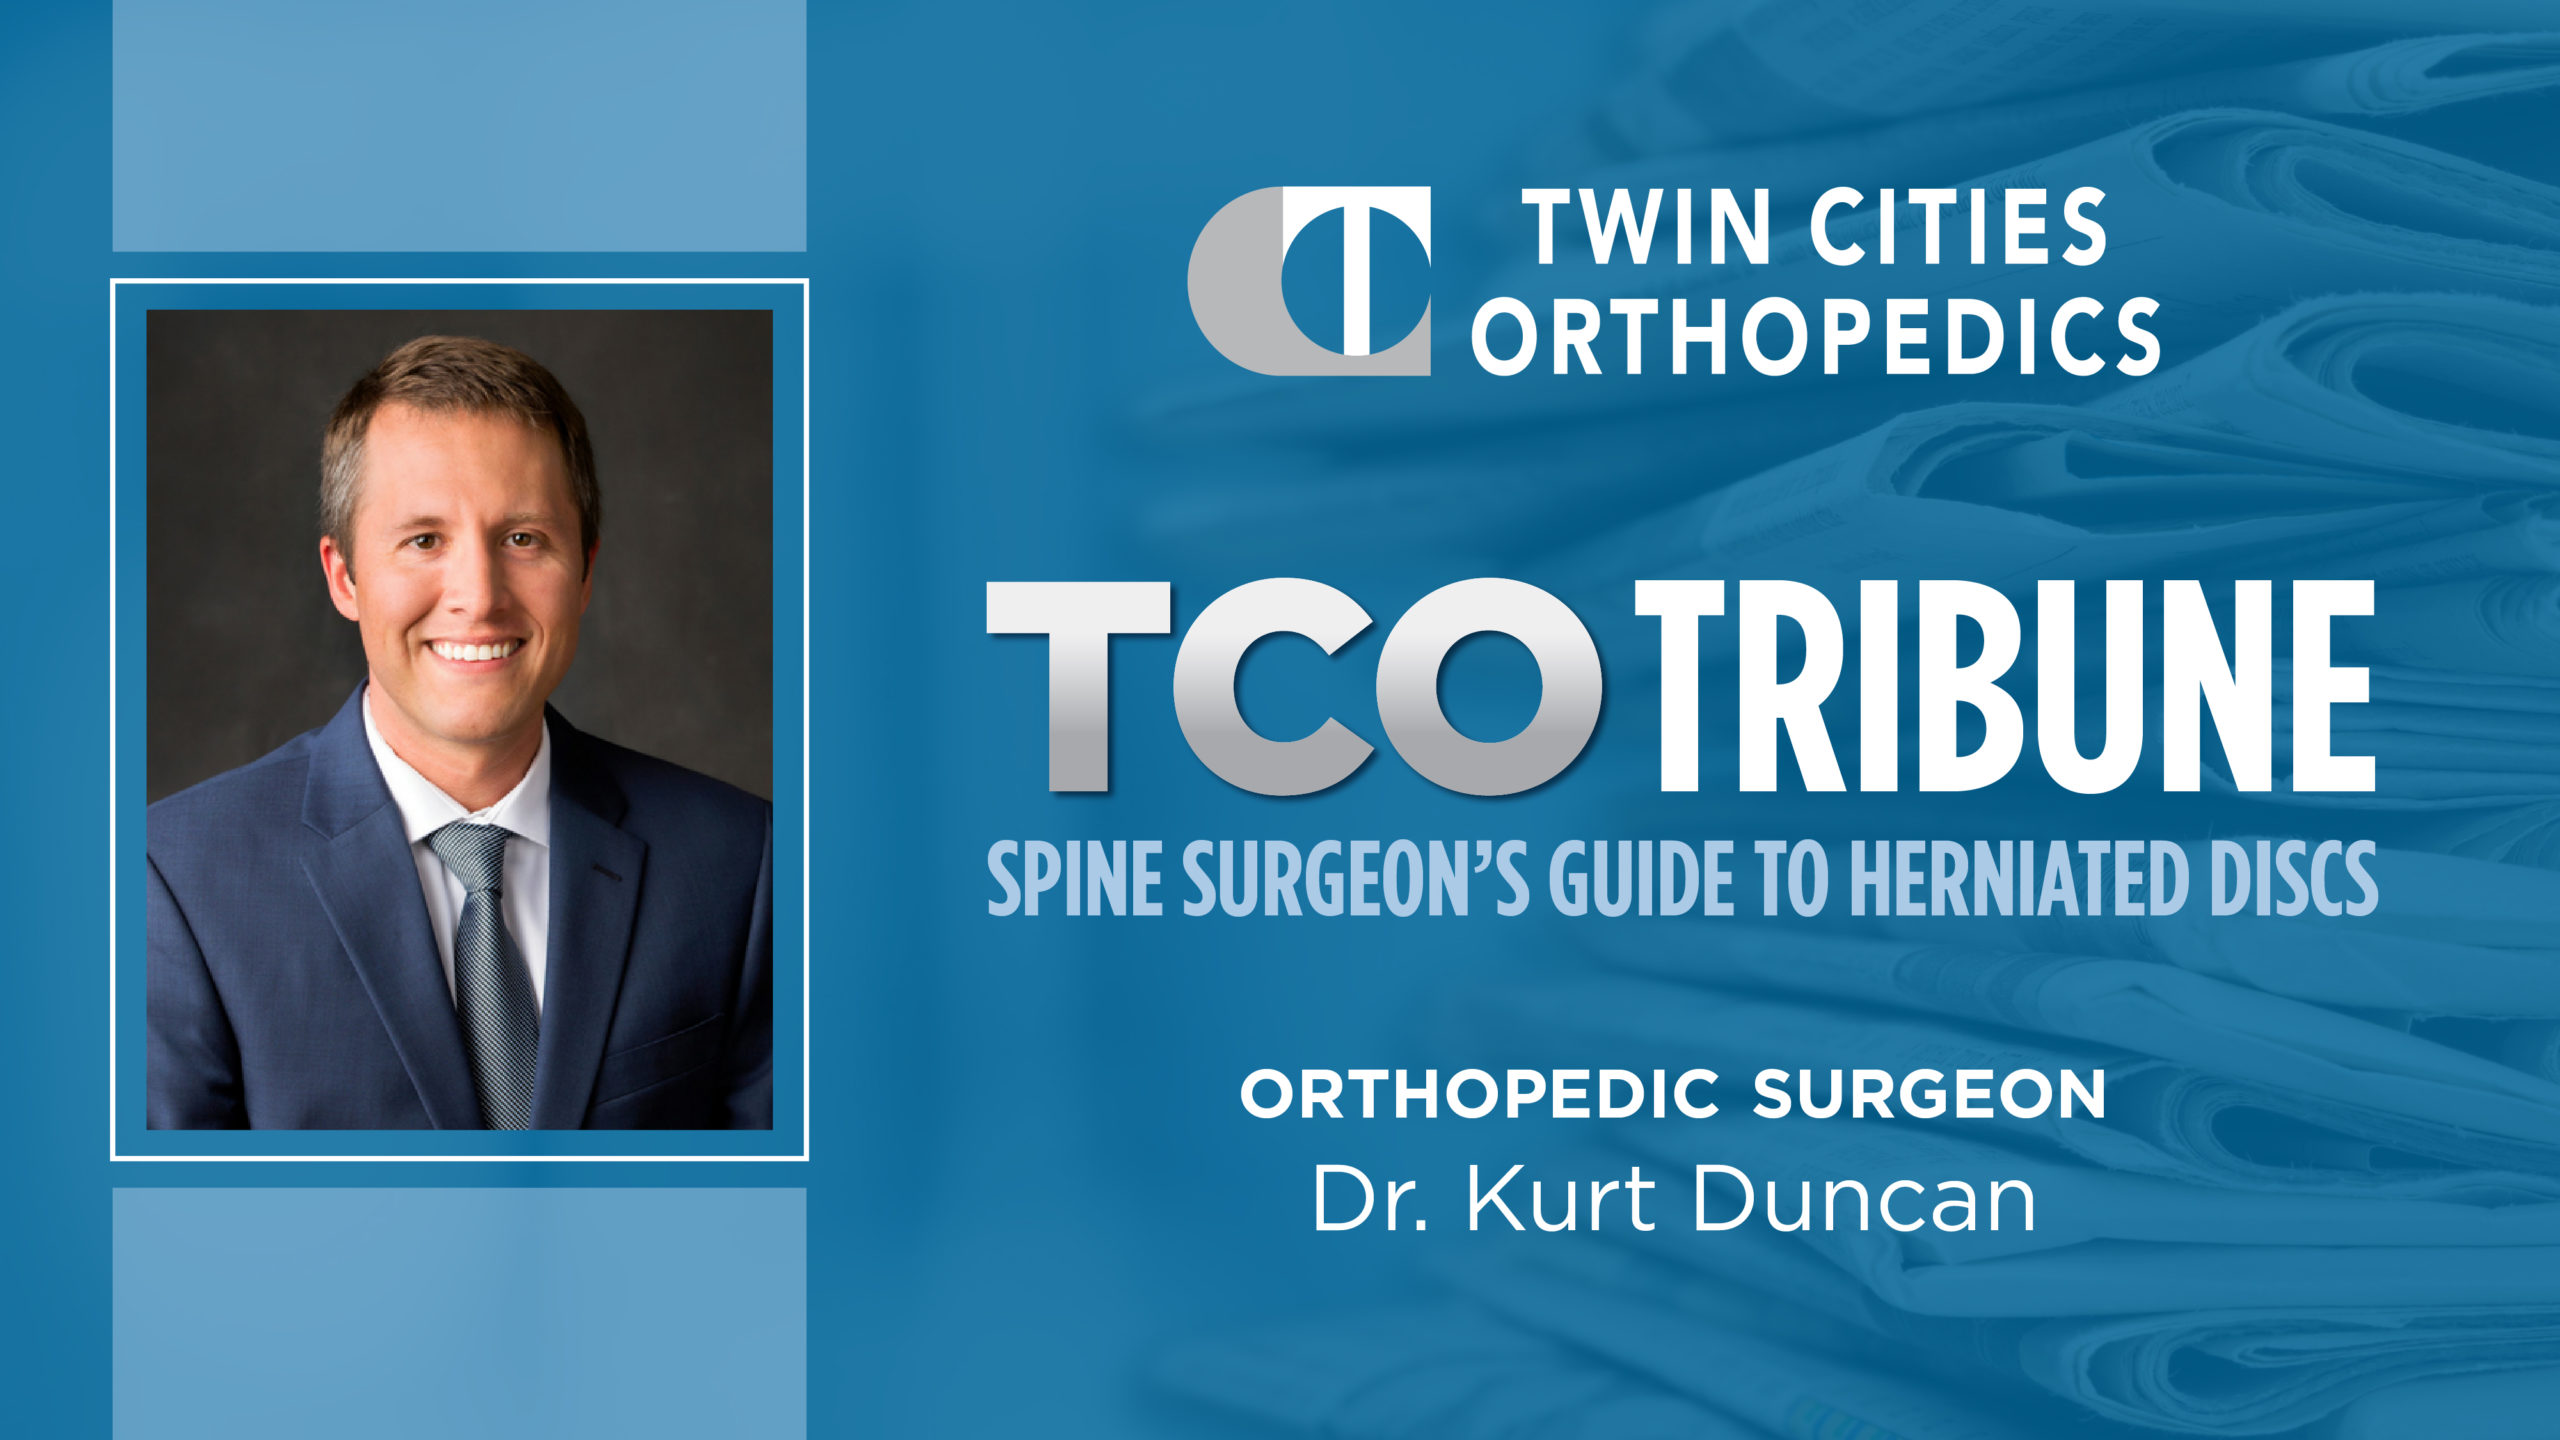 Spine Surgeon's Guide to Herniated Discs